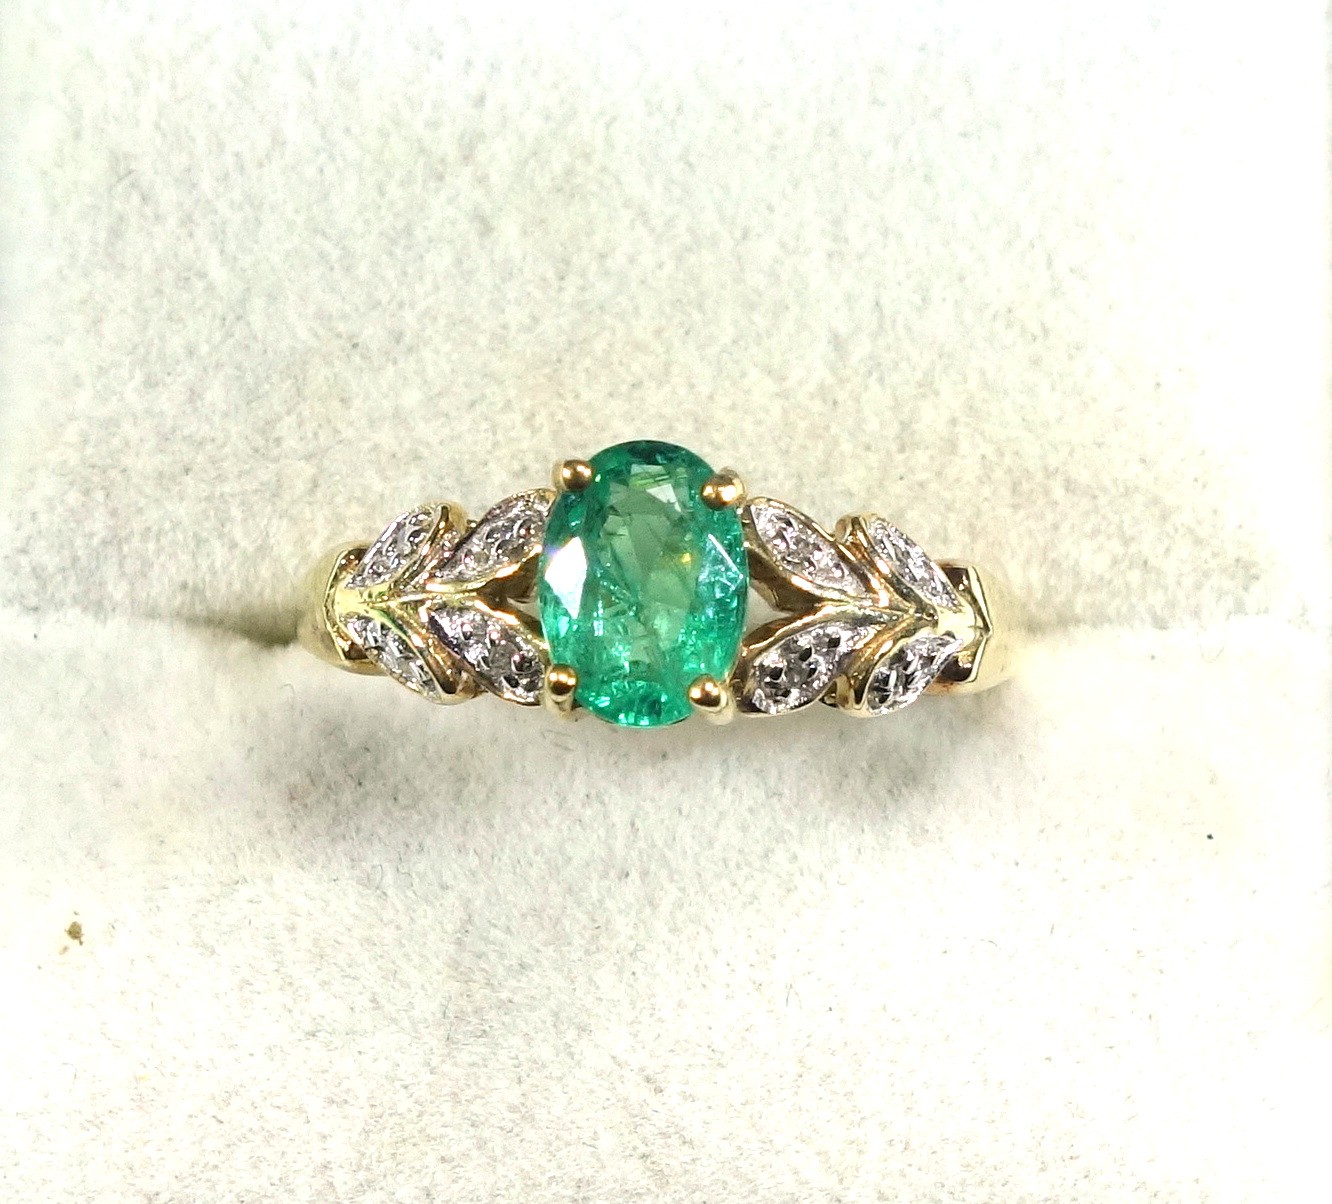 9ct gold ring set topaz and 6 diamonds, 9ct ring set pale green stone and brilliants, and a 9ct ring - Image 3 of 5